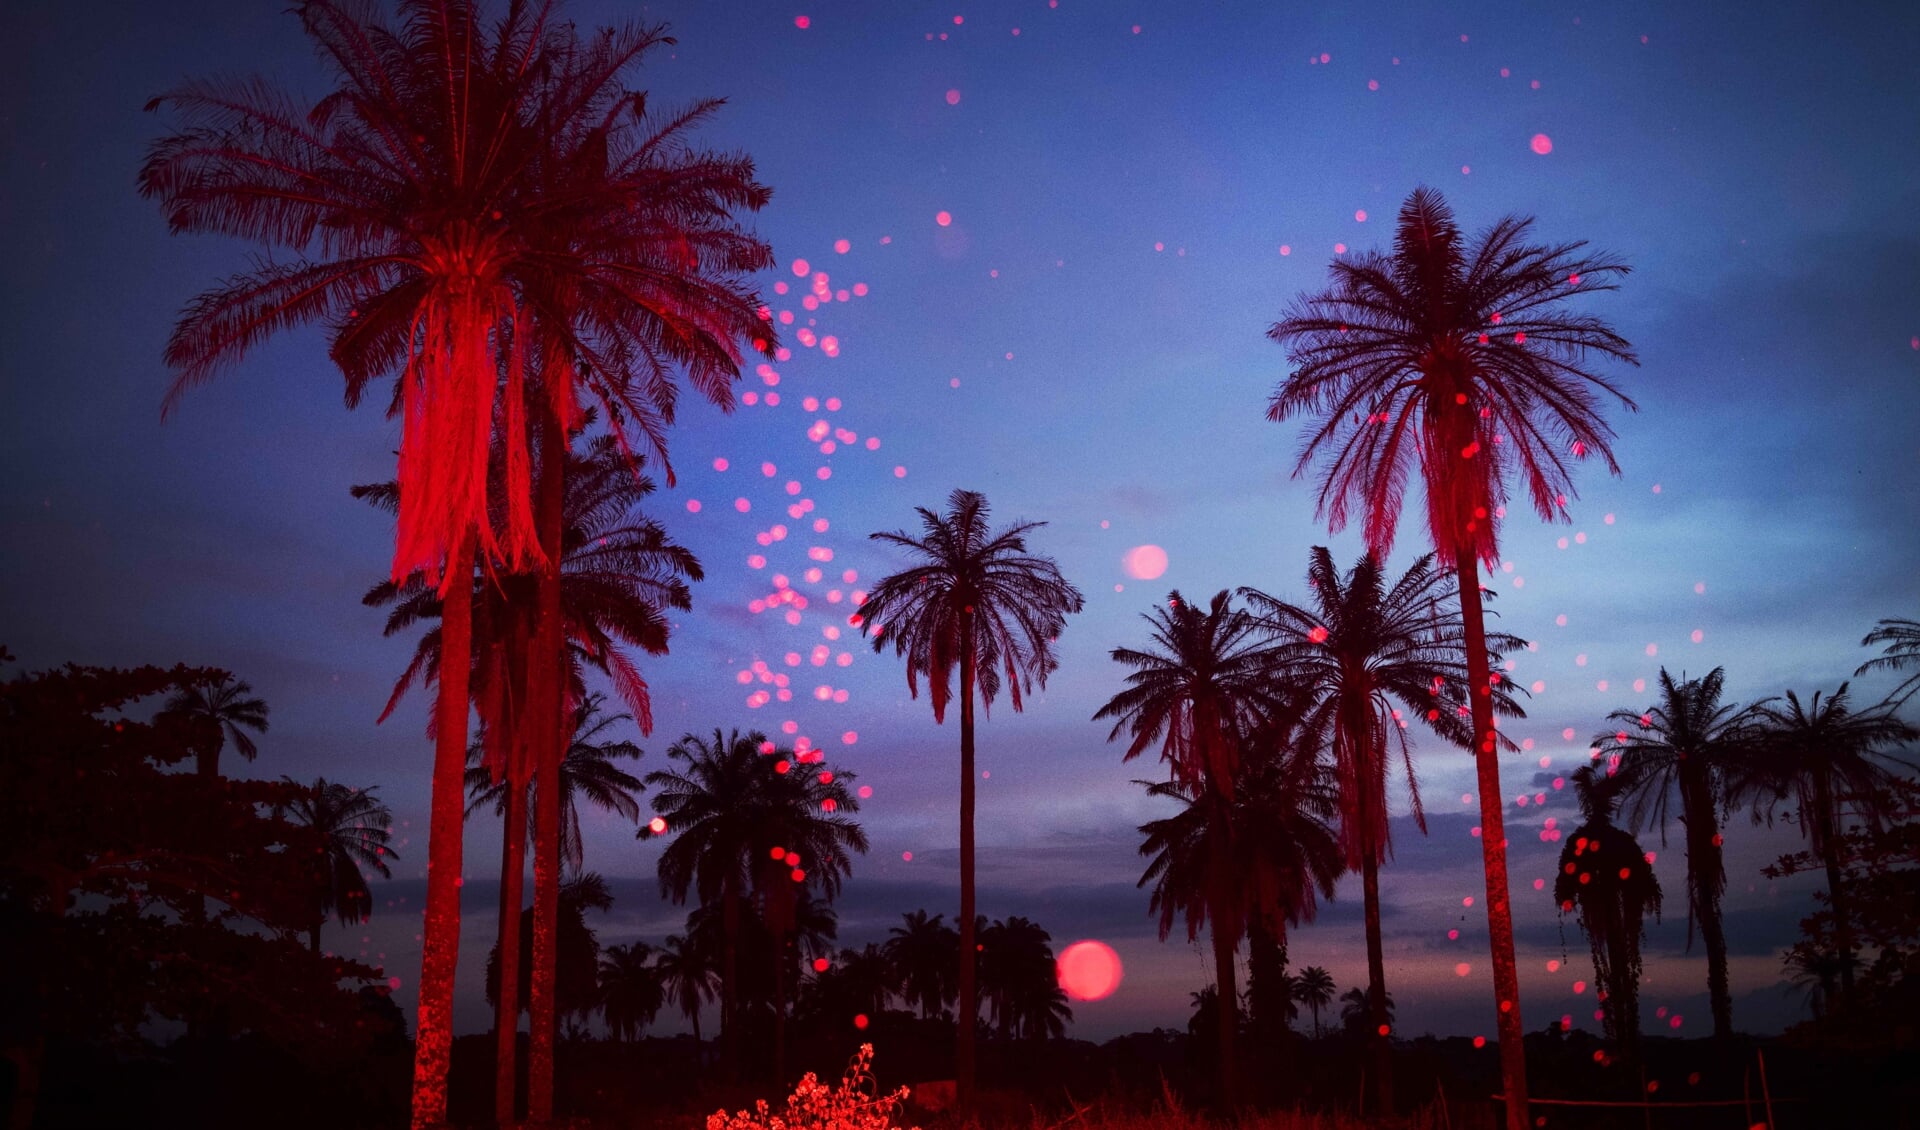 NIGERIA, Igbo-Ora, October 2018.Palmtree landscape at sundown. The flash lights up the bugs in the air. Igbo-Ora, the self proclaimed 'Twin Capital of the World' has earned its nickname by the unusually large number of twin births in the region. Research has suggested that the multiple births could 